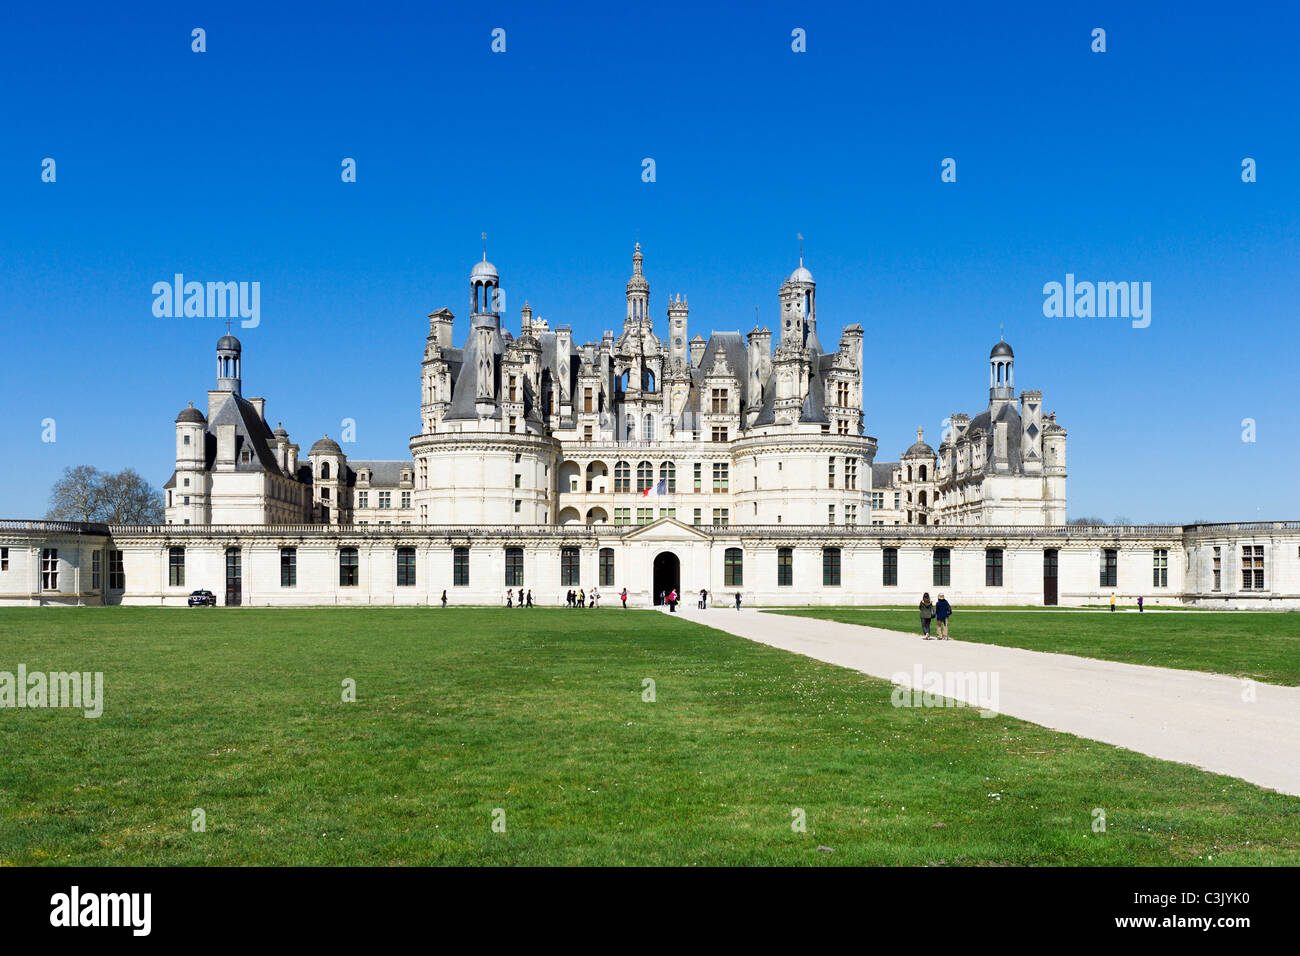 The south east facade of the Chateau de Chambord, Loire Valley, Touraine, France Stock Photo